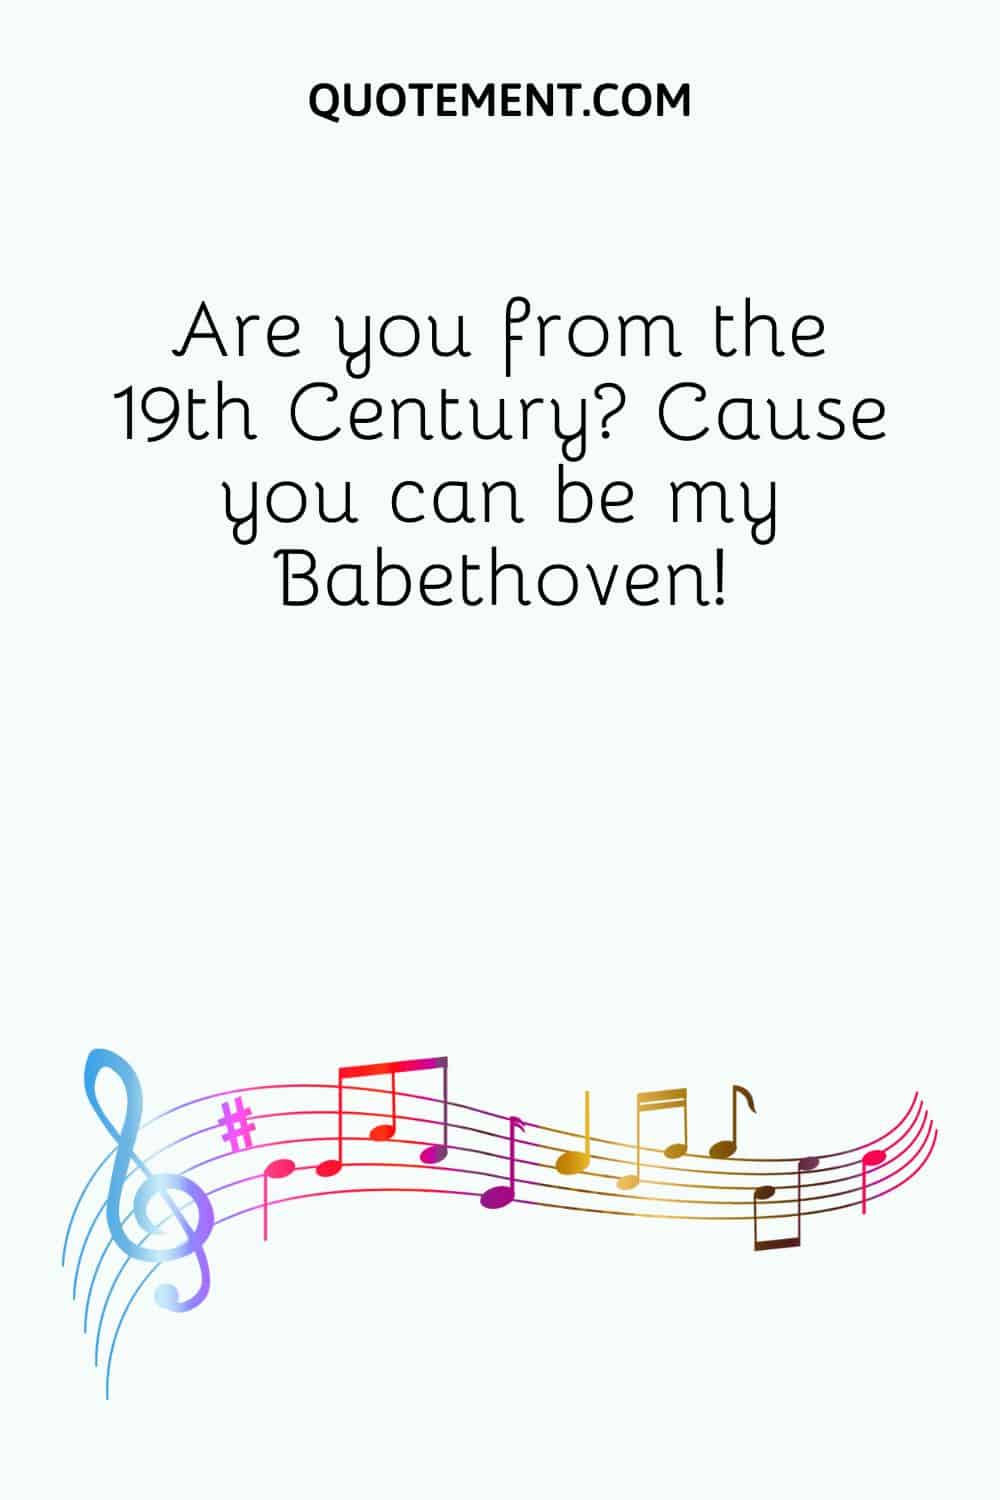 Are you from the 19th Century Cause you can be my Babethoven